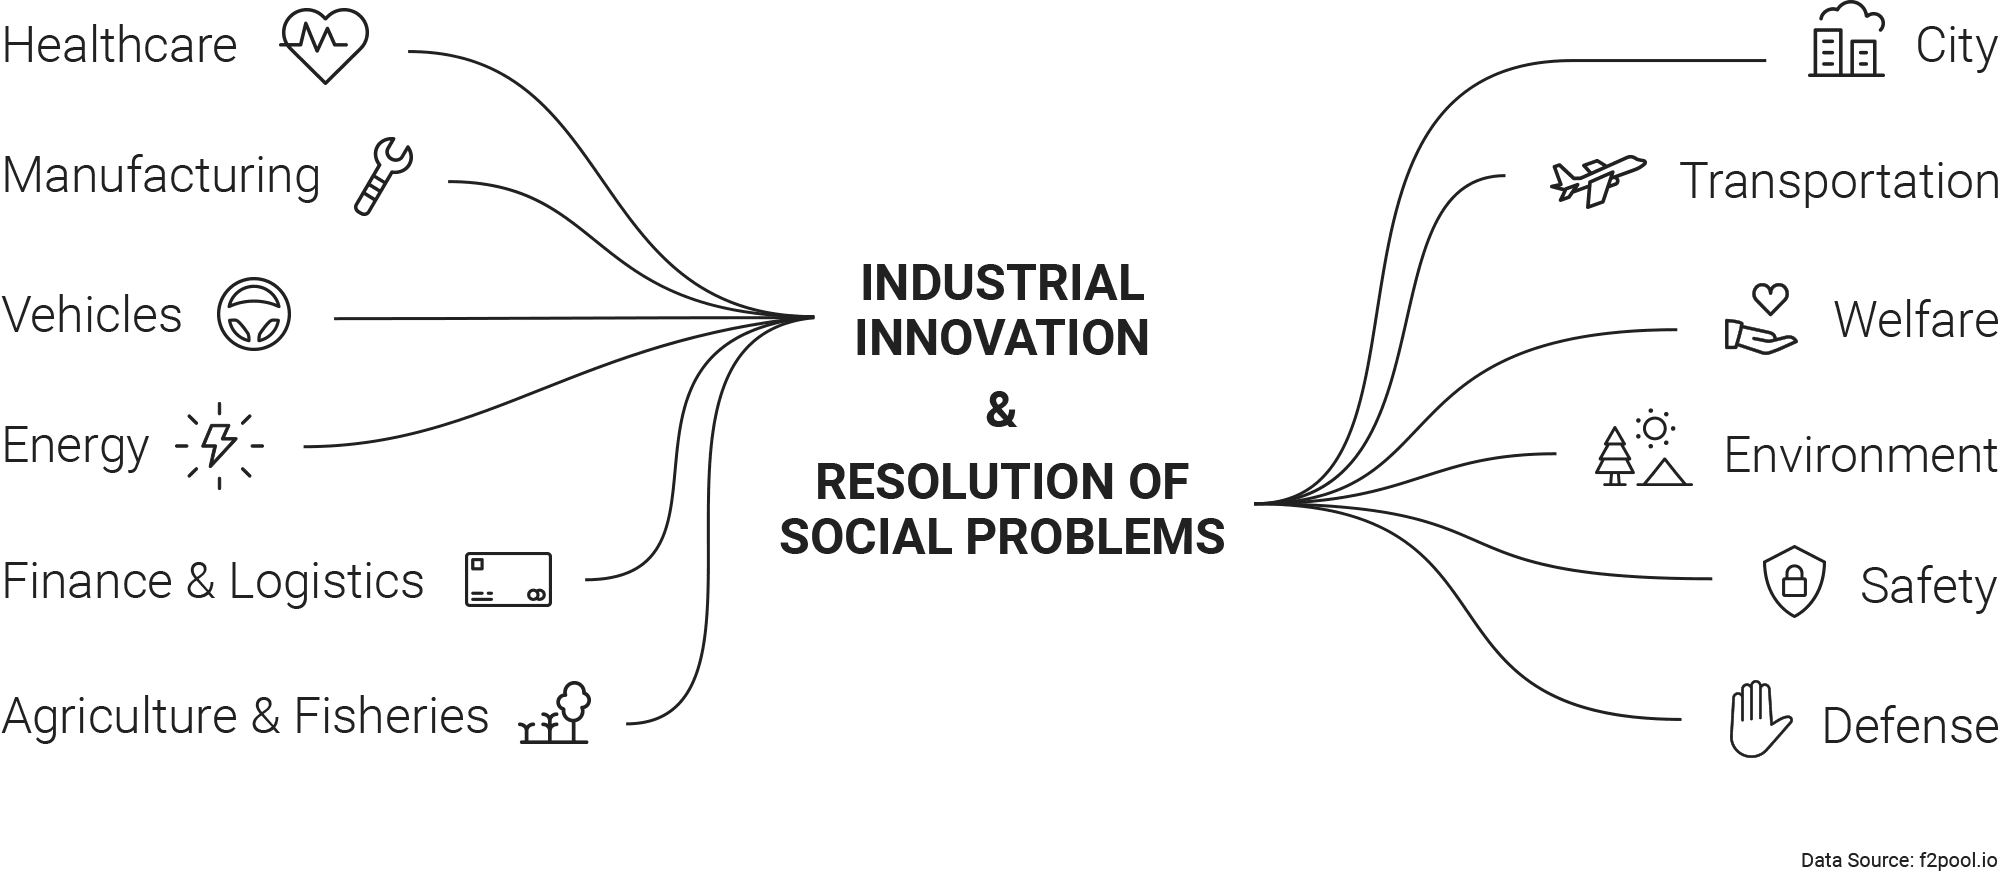 Industrial Innovation and Resolution of Social Problems